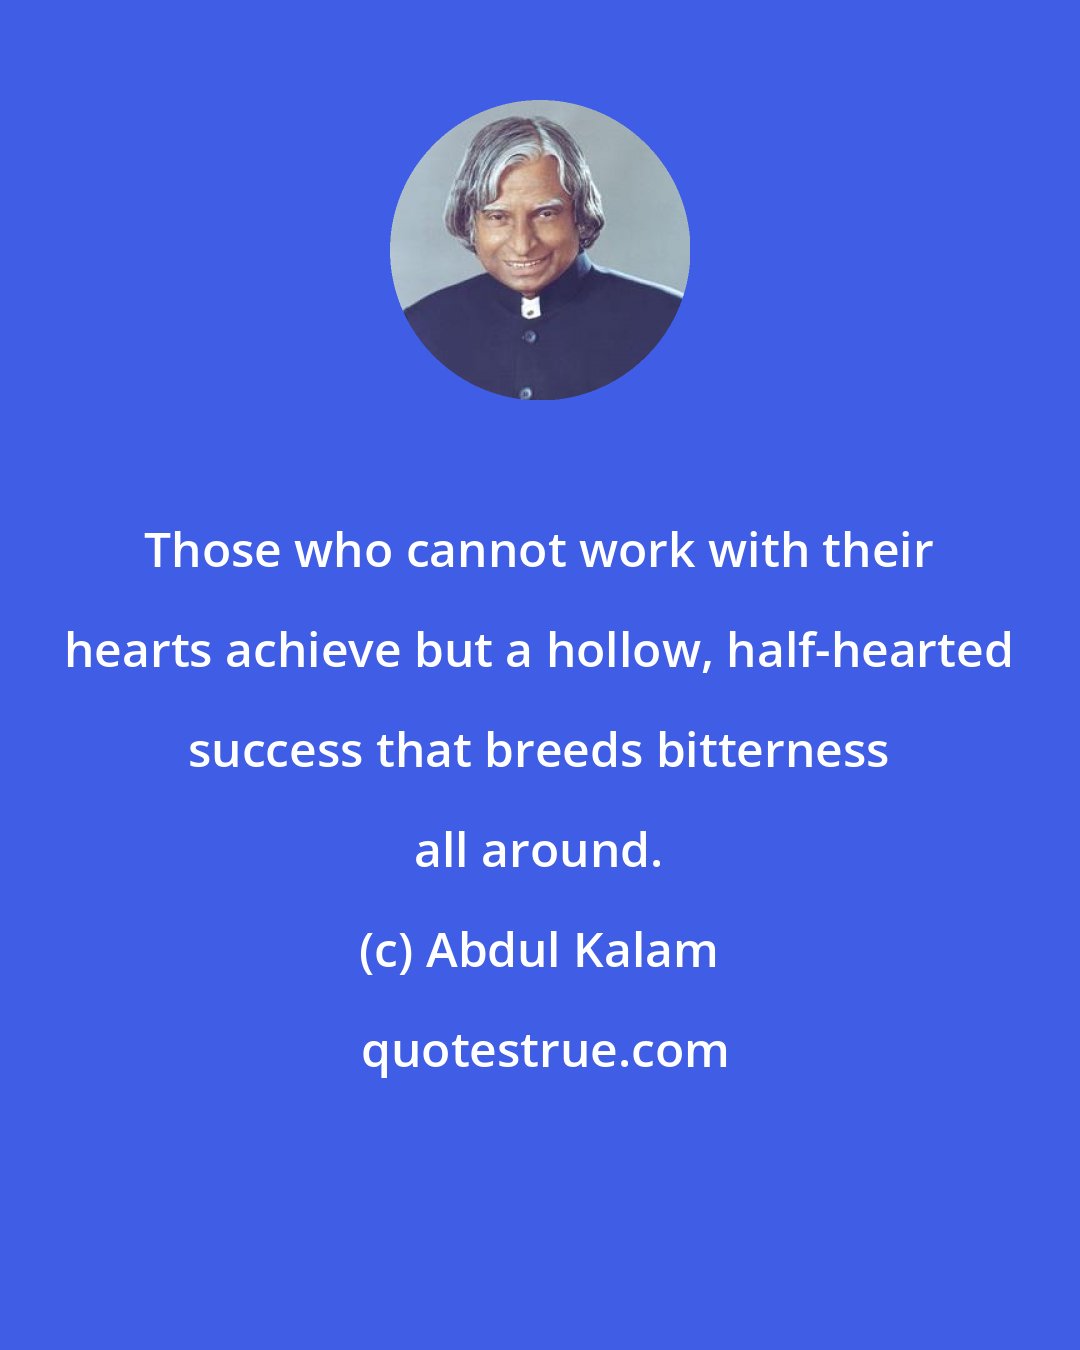 Abdul Kalam: Those who cannot work with their hearts achieve but a hollow, half-hearted success that breeds bitterness all around.